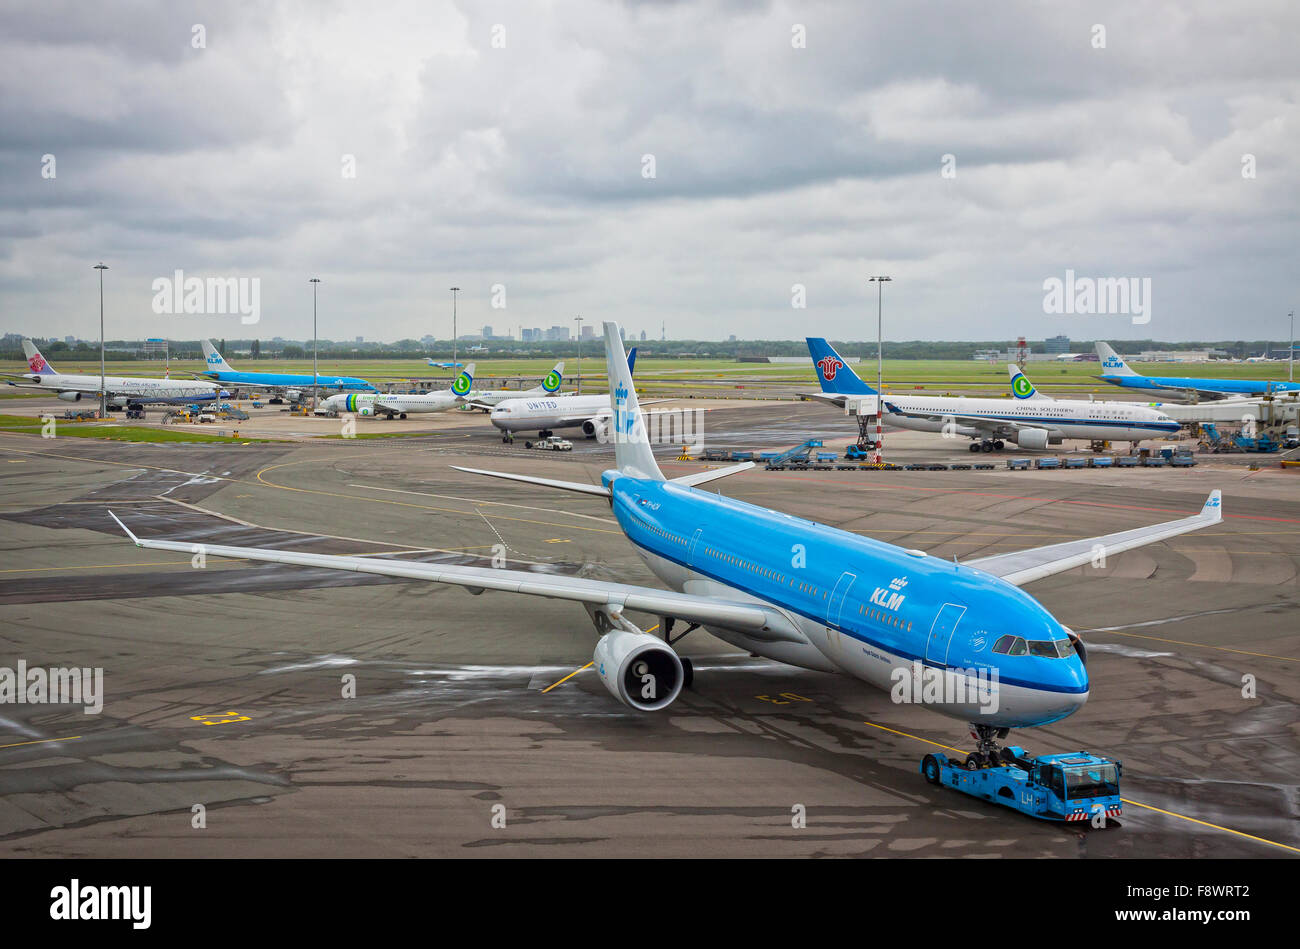 AMSTERDAM - JUNE 23, 2013: Amsterdam Airport Schiphol, the main international airport of the Netherlands. Schiphol is an important European airport, ranking as 4th busiest by passenger traffic in 2012 Stock Photo